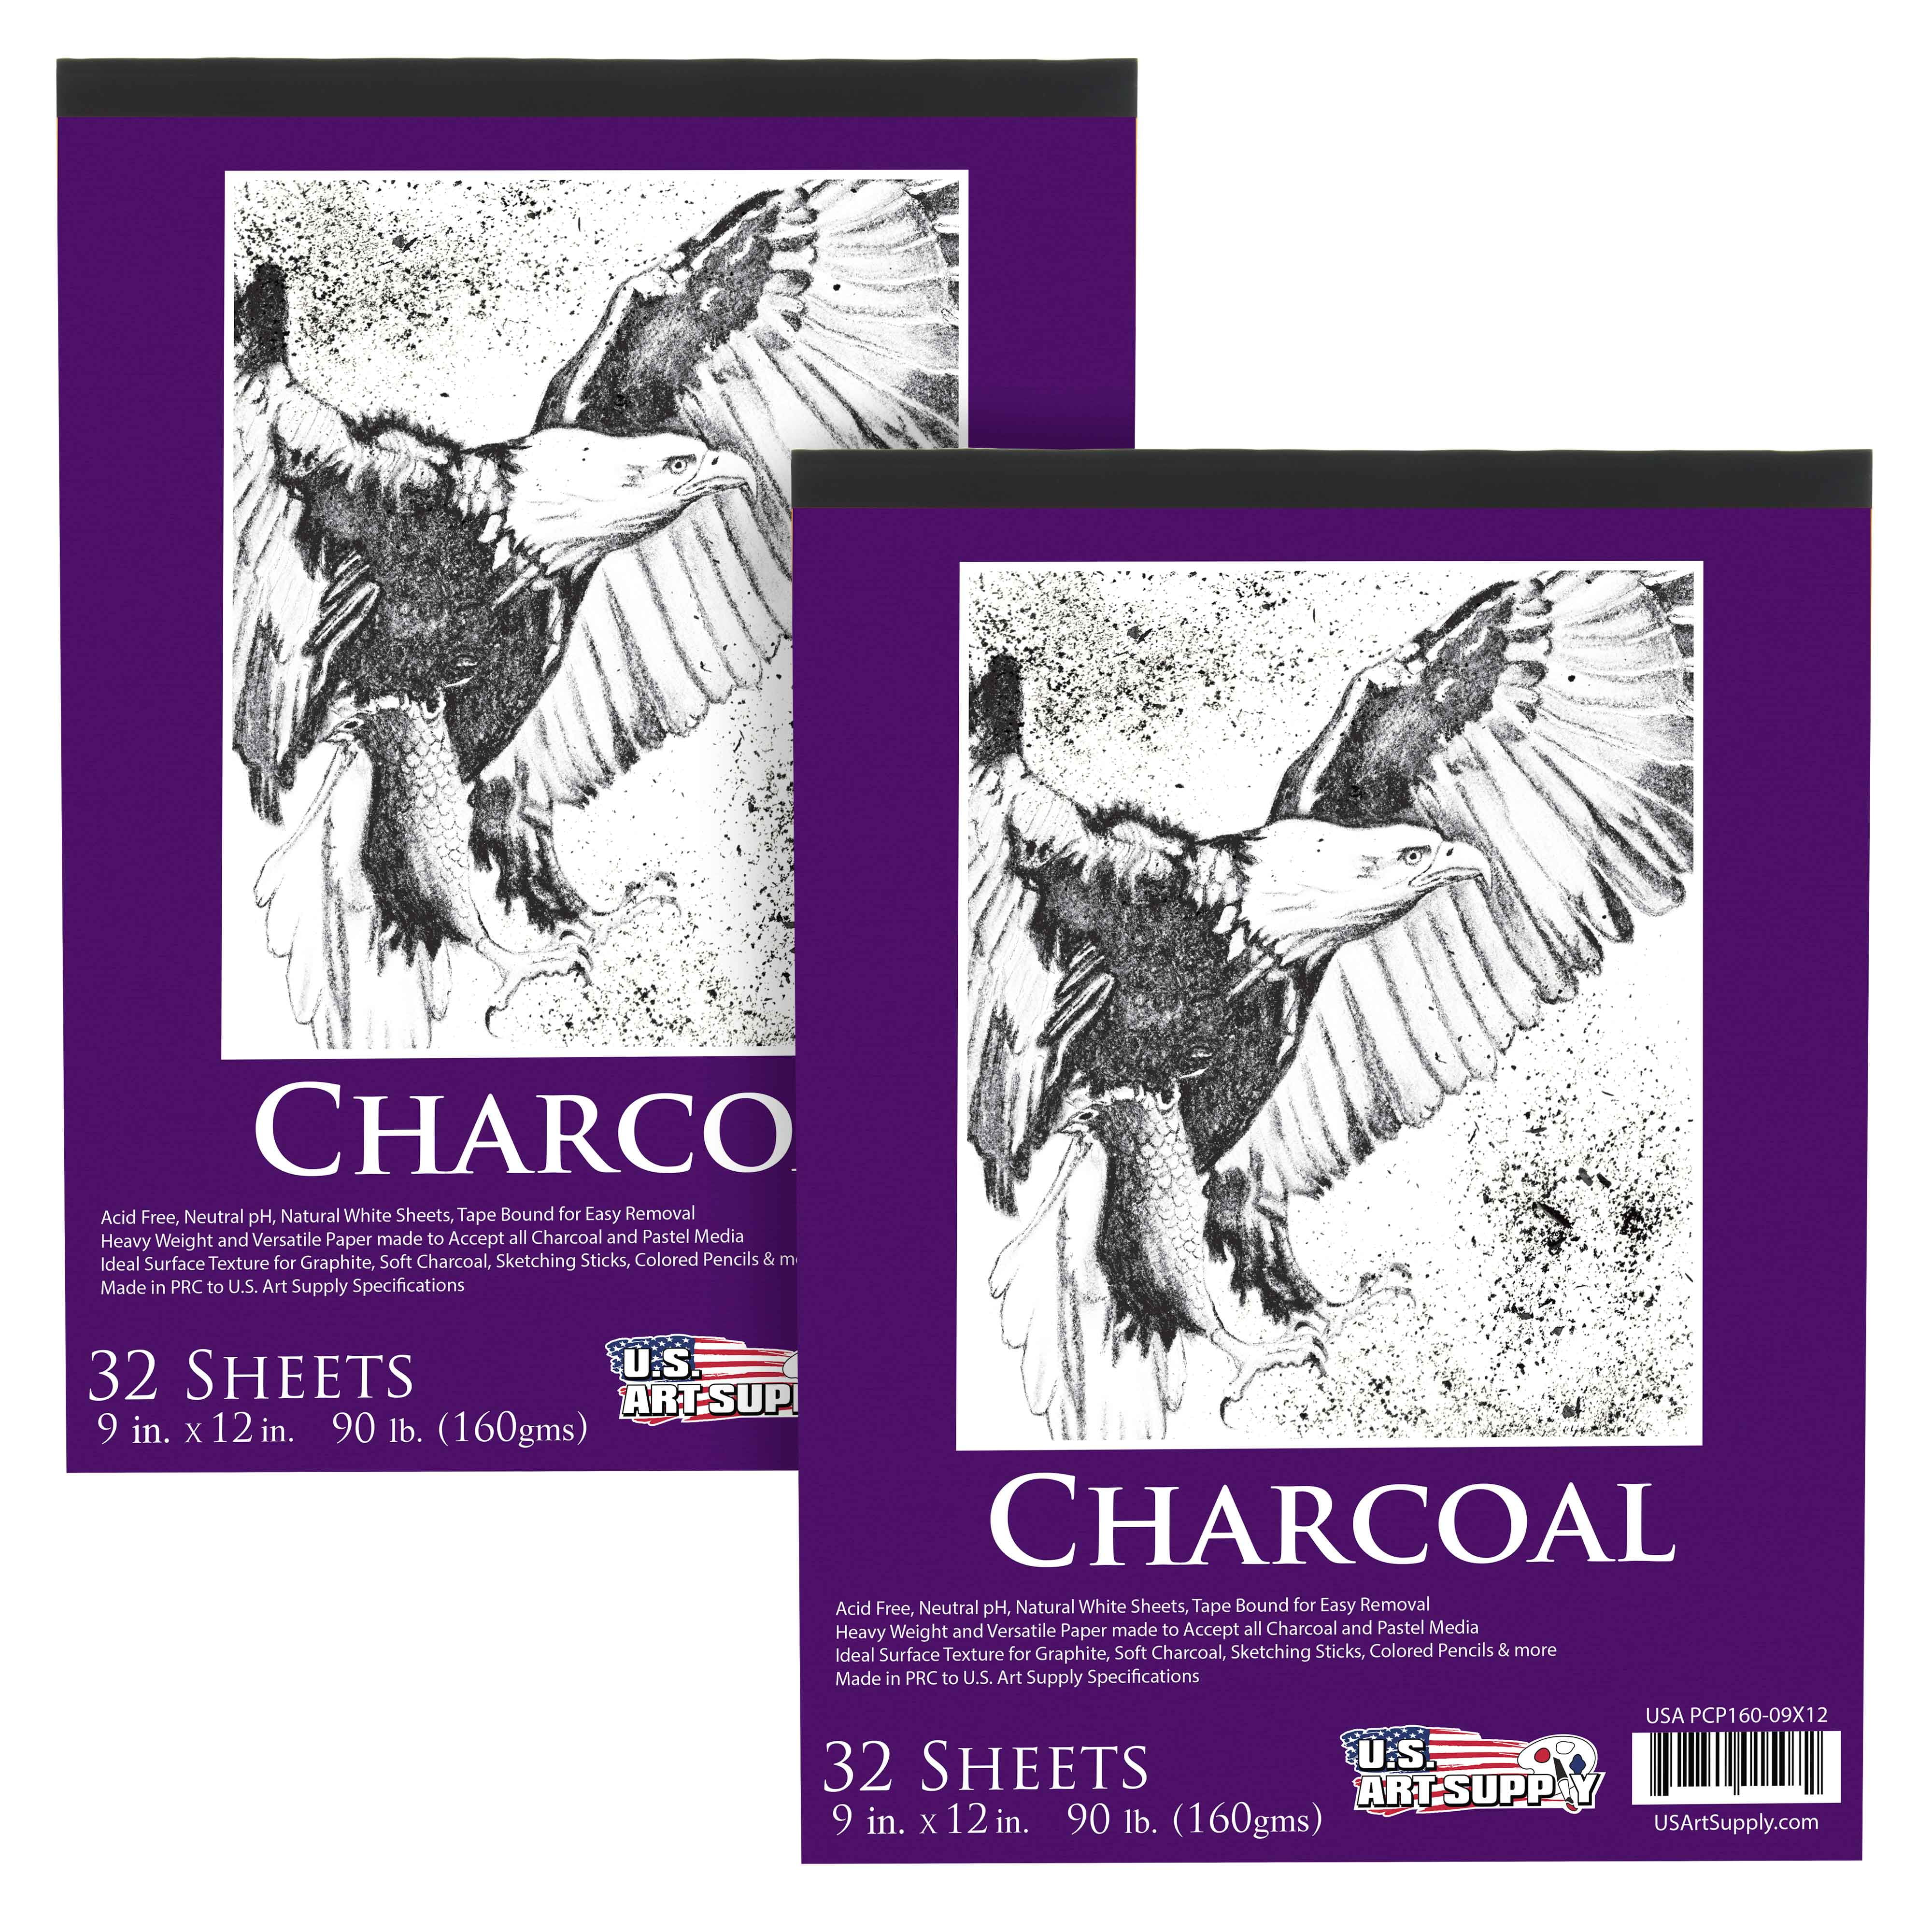 Strathmore 500 Series Charcoal Paper, 25 x 19 Inches, 64 lb, Smoke